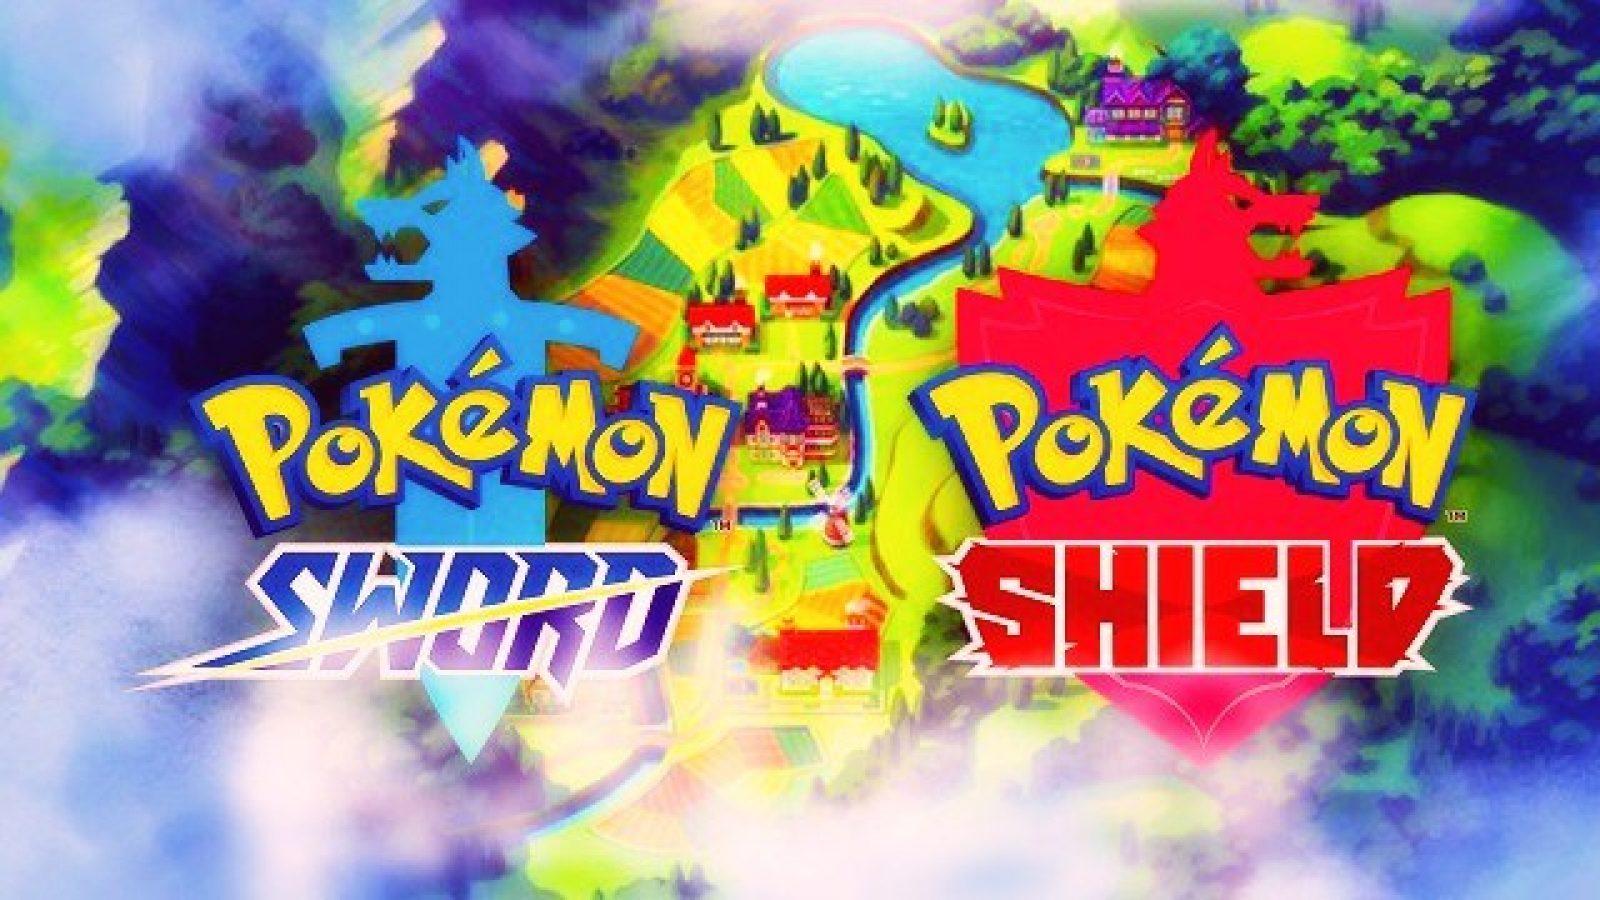 Pokémon Sword and Shield' Information Coming Soon Likely Revealing